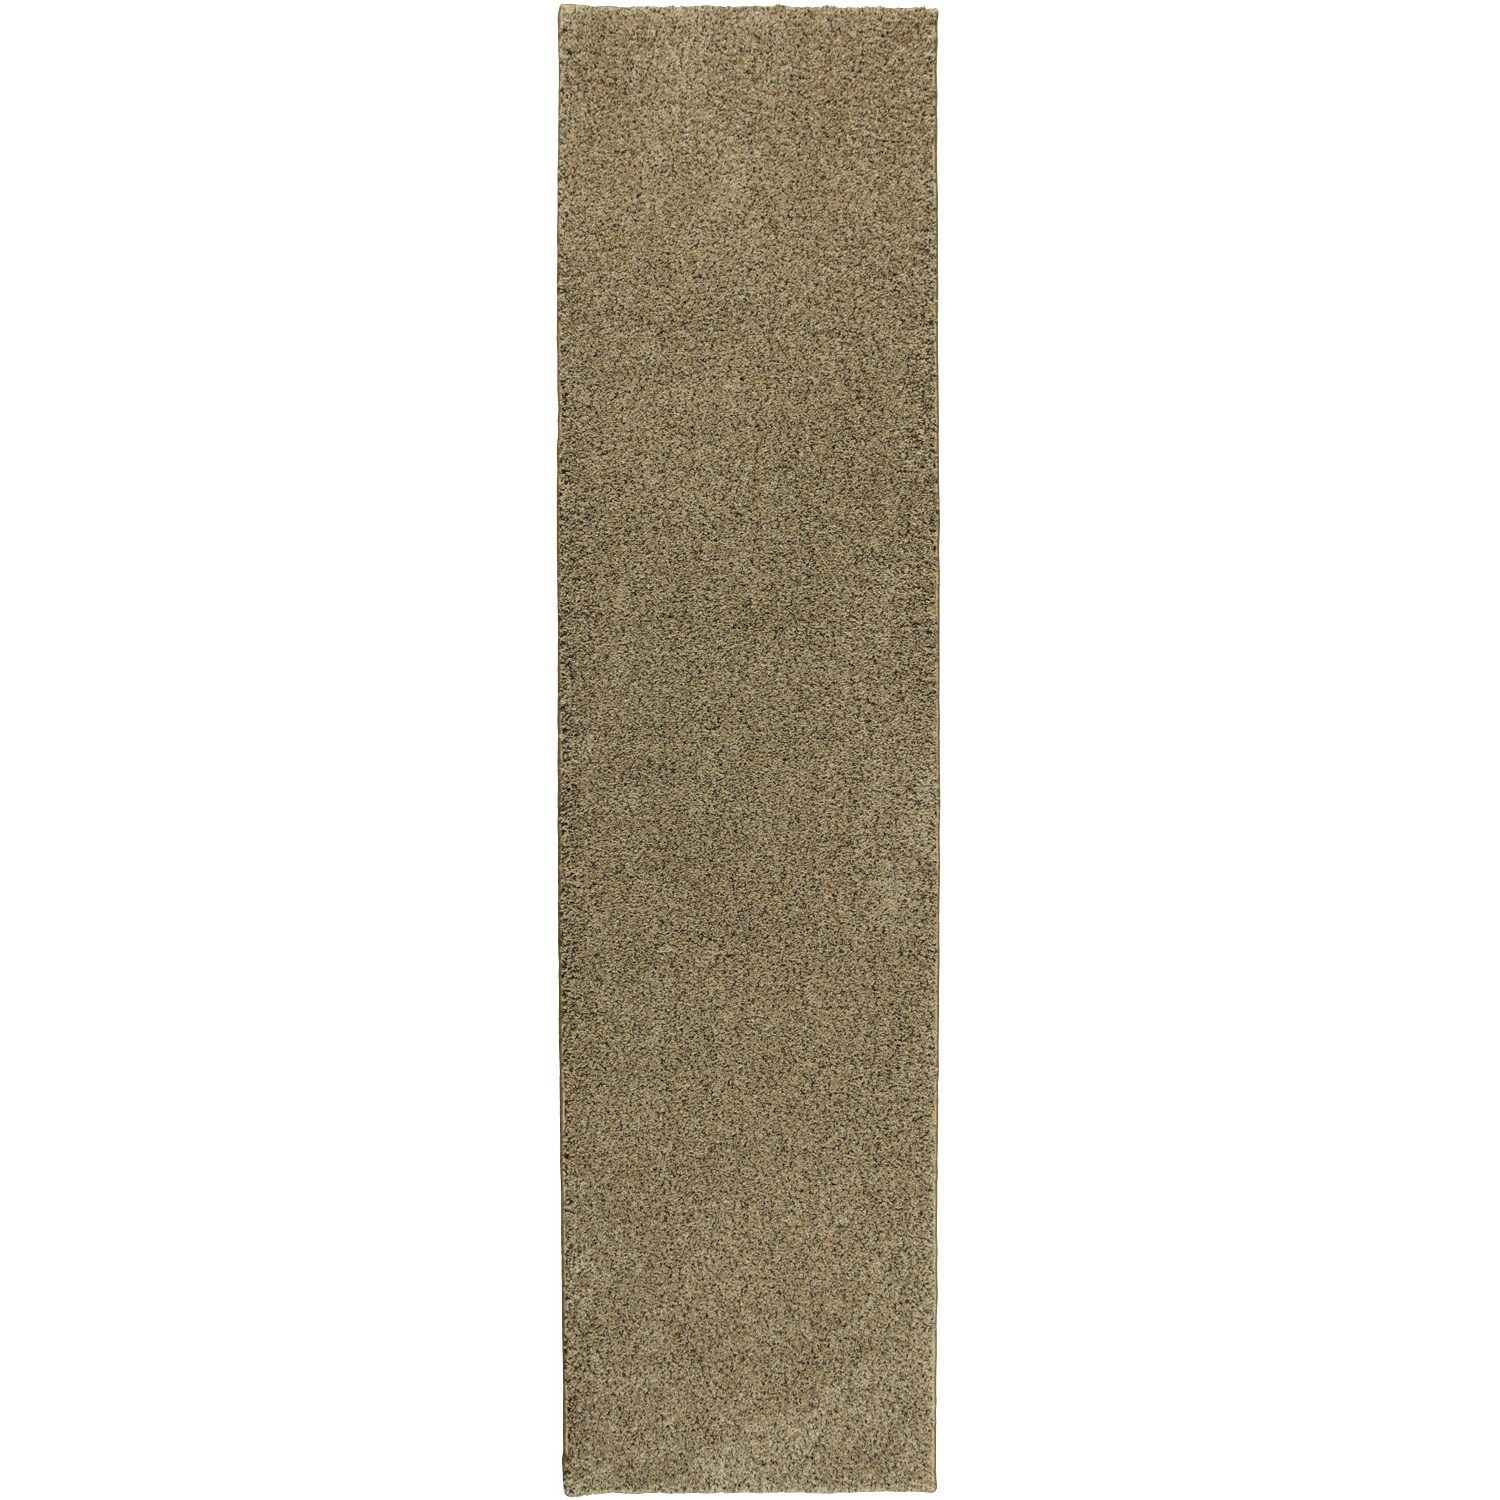 Christopher Knight Home Super Thick Shag Runner Rug (2 X 6)